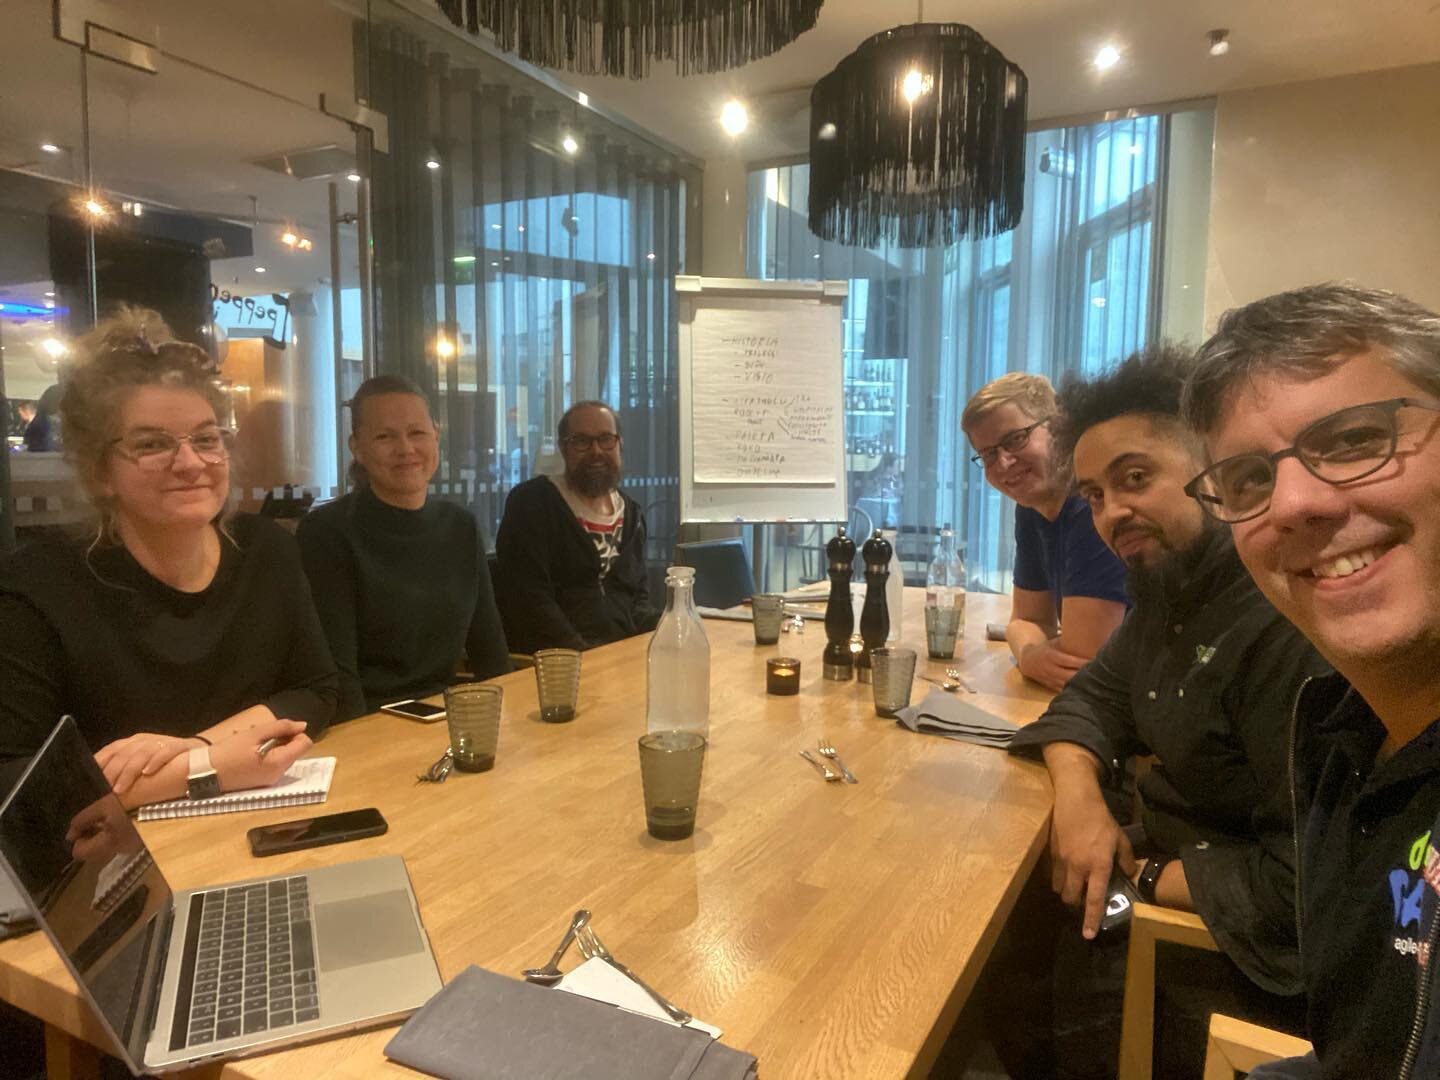 Today we kicked off the organisation of ACCFI 2020 with the new organisers team! We are targeting to have the event in August/September 2020. Stay tuned!